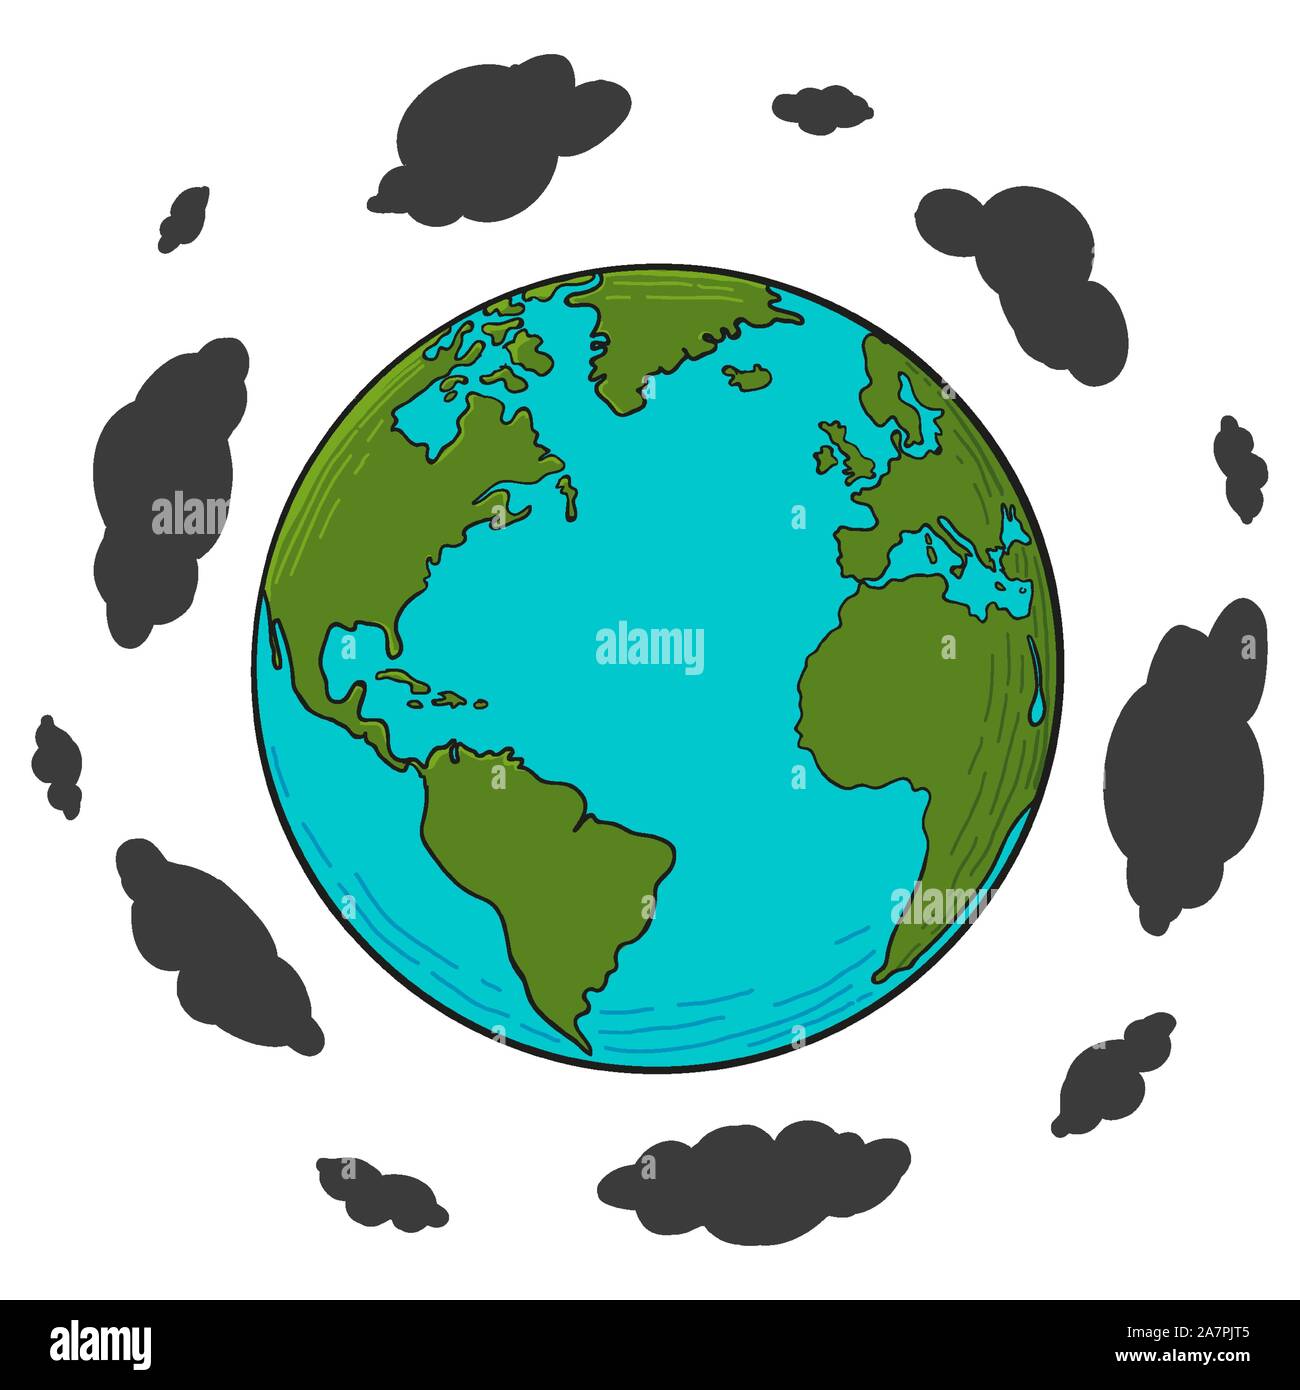 Air Pollution Concept Illustration with Hand Drawn Vector Earth .Black Clouds Spinning Around The World. Stock Vector